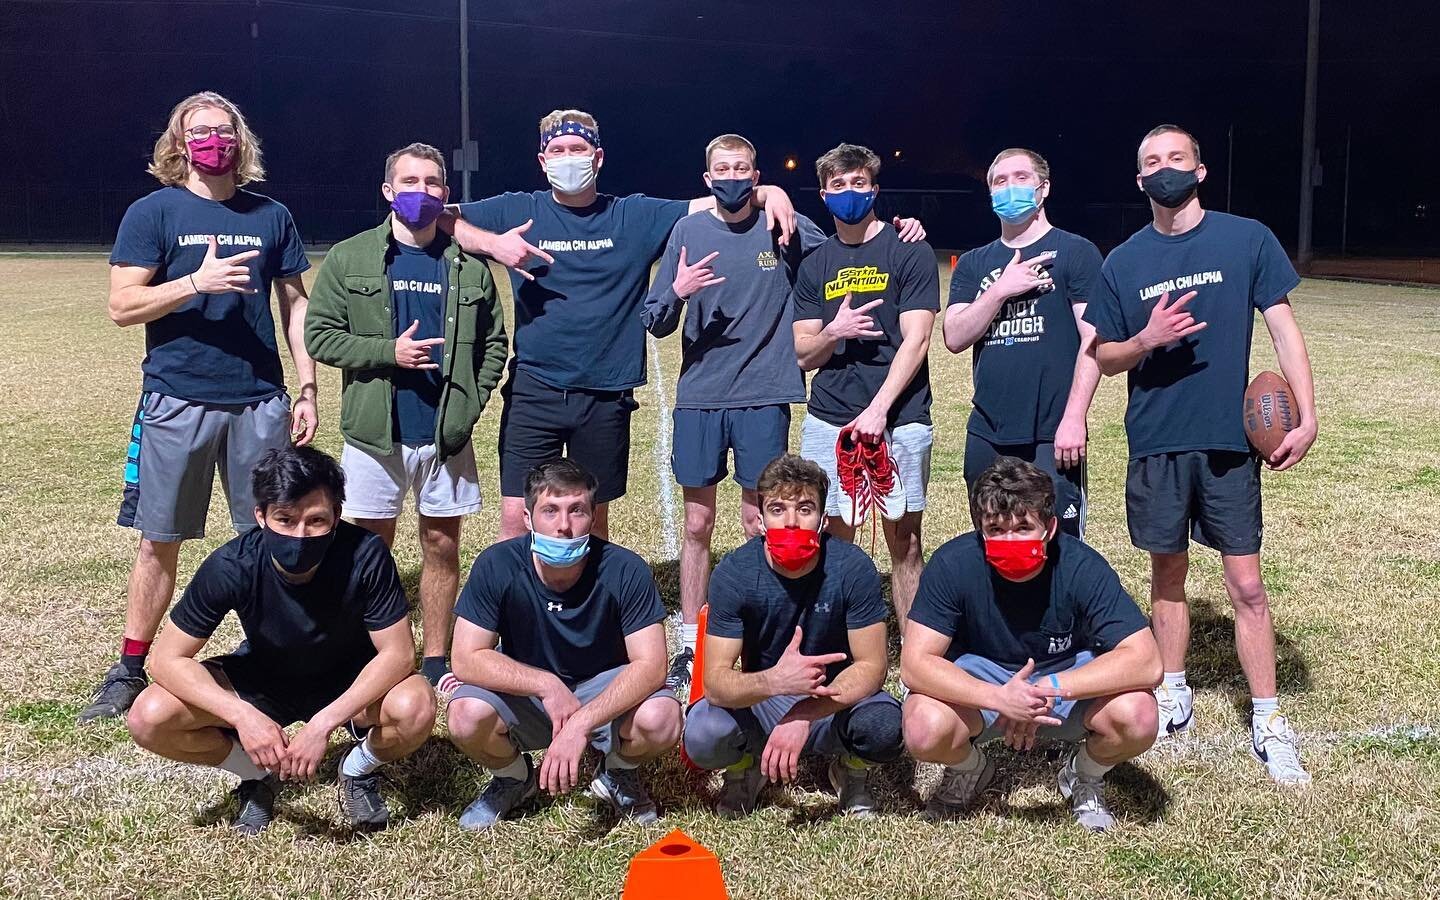 After a long off-season we got a W in our first game of the year, beating DTD 28-6 #RushLambdaChi #ZAX #Wszn